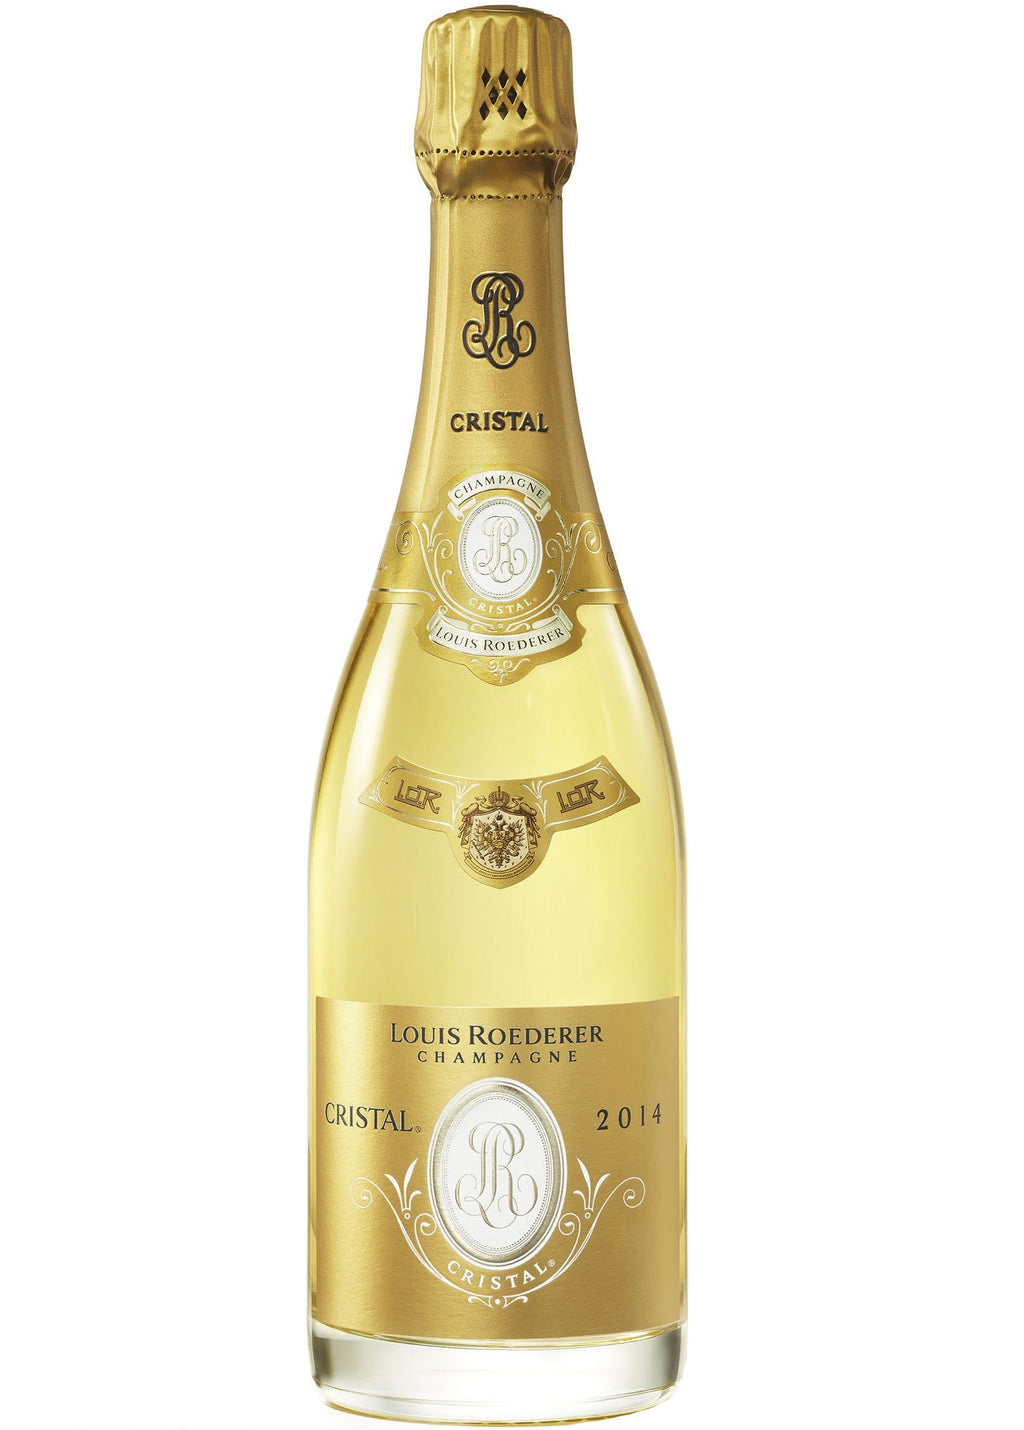 Louis Roederer | Champagne Iconic Champagne Luxury Cristal | 2015 BuyWinesOnline